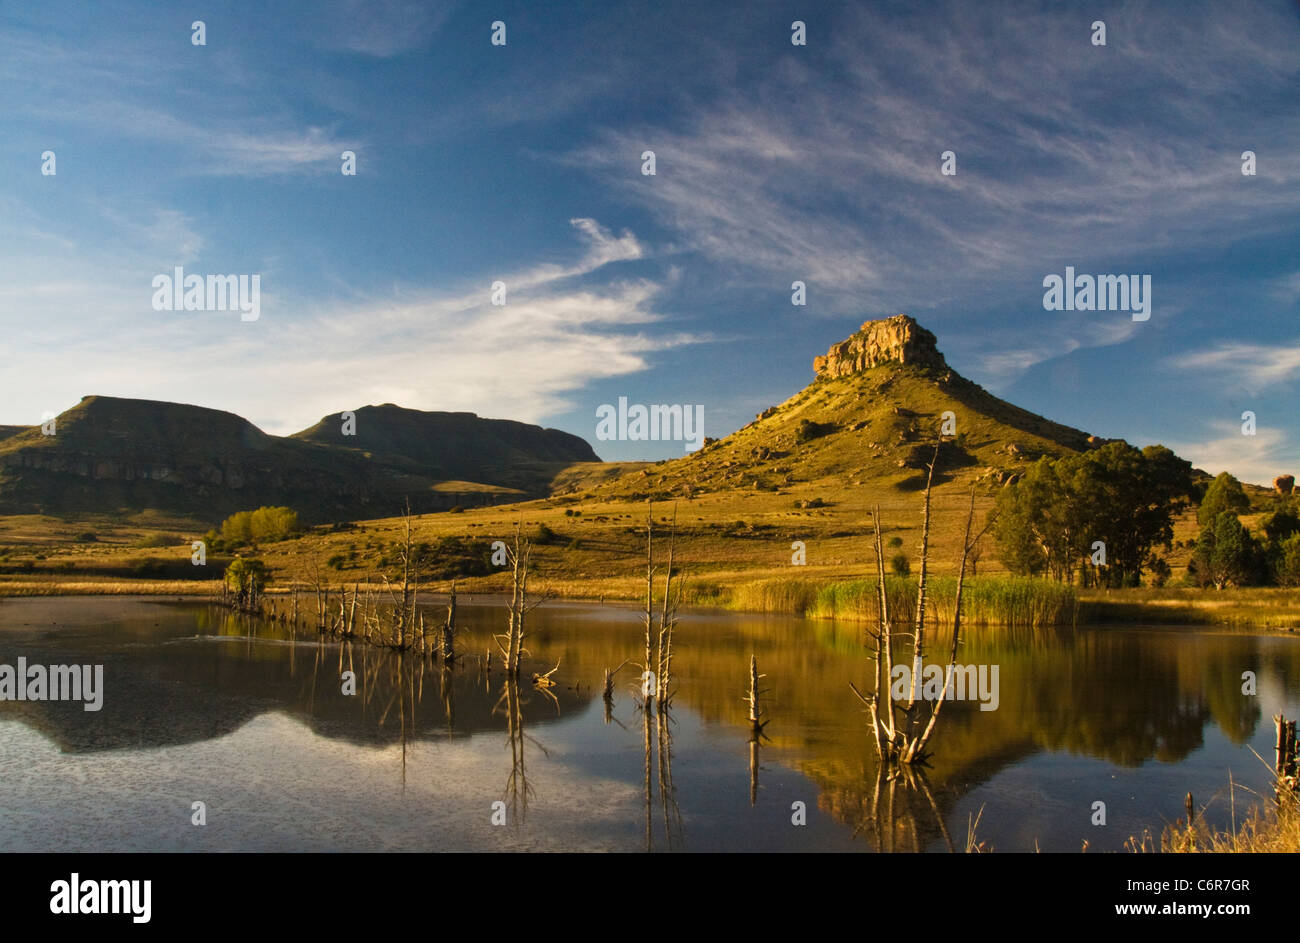 Clarens scenery showing a distant sandstone koppie with a dam in the foreground Stock Photo